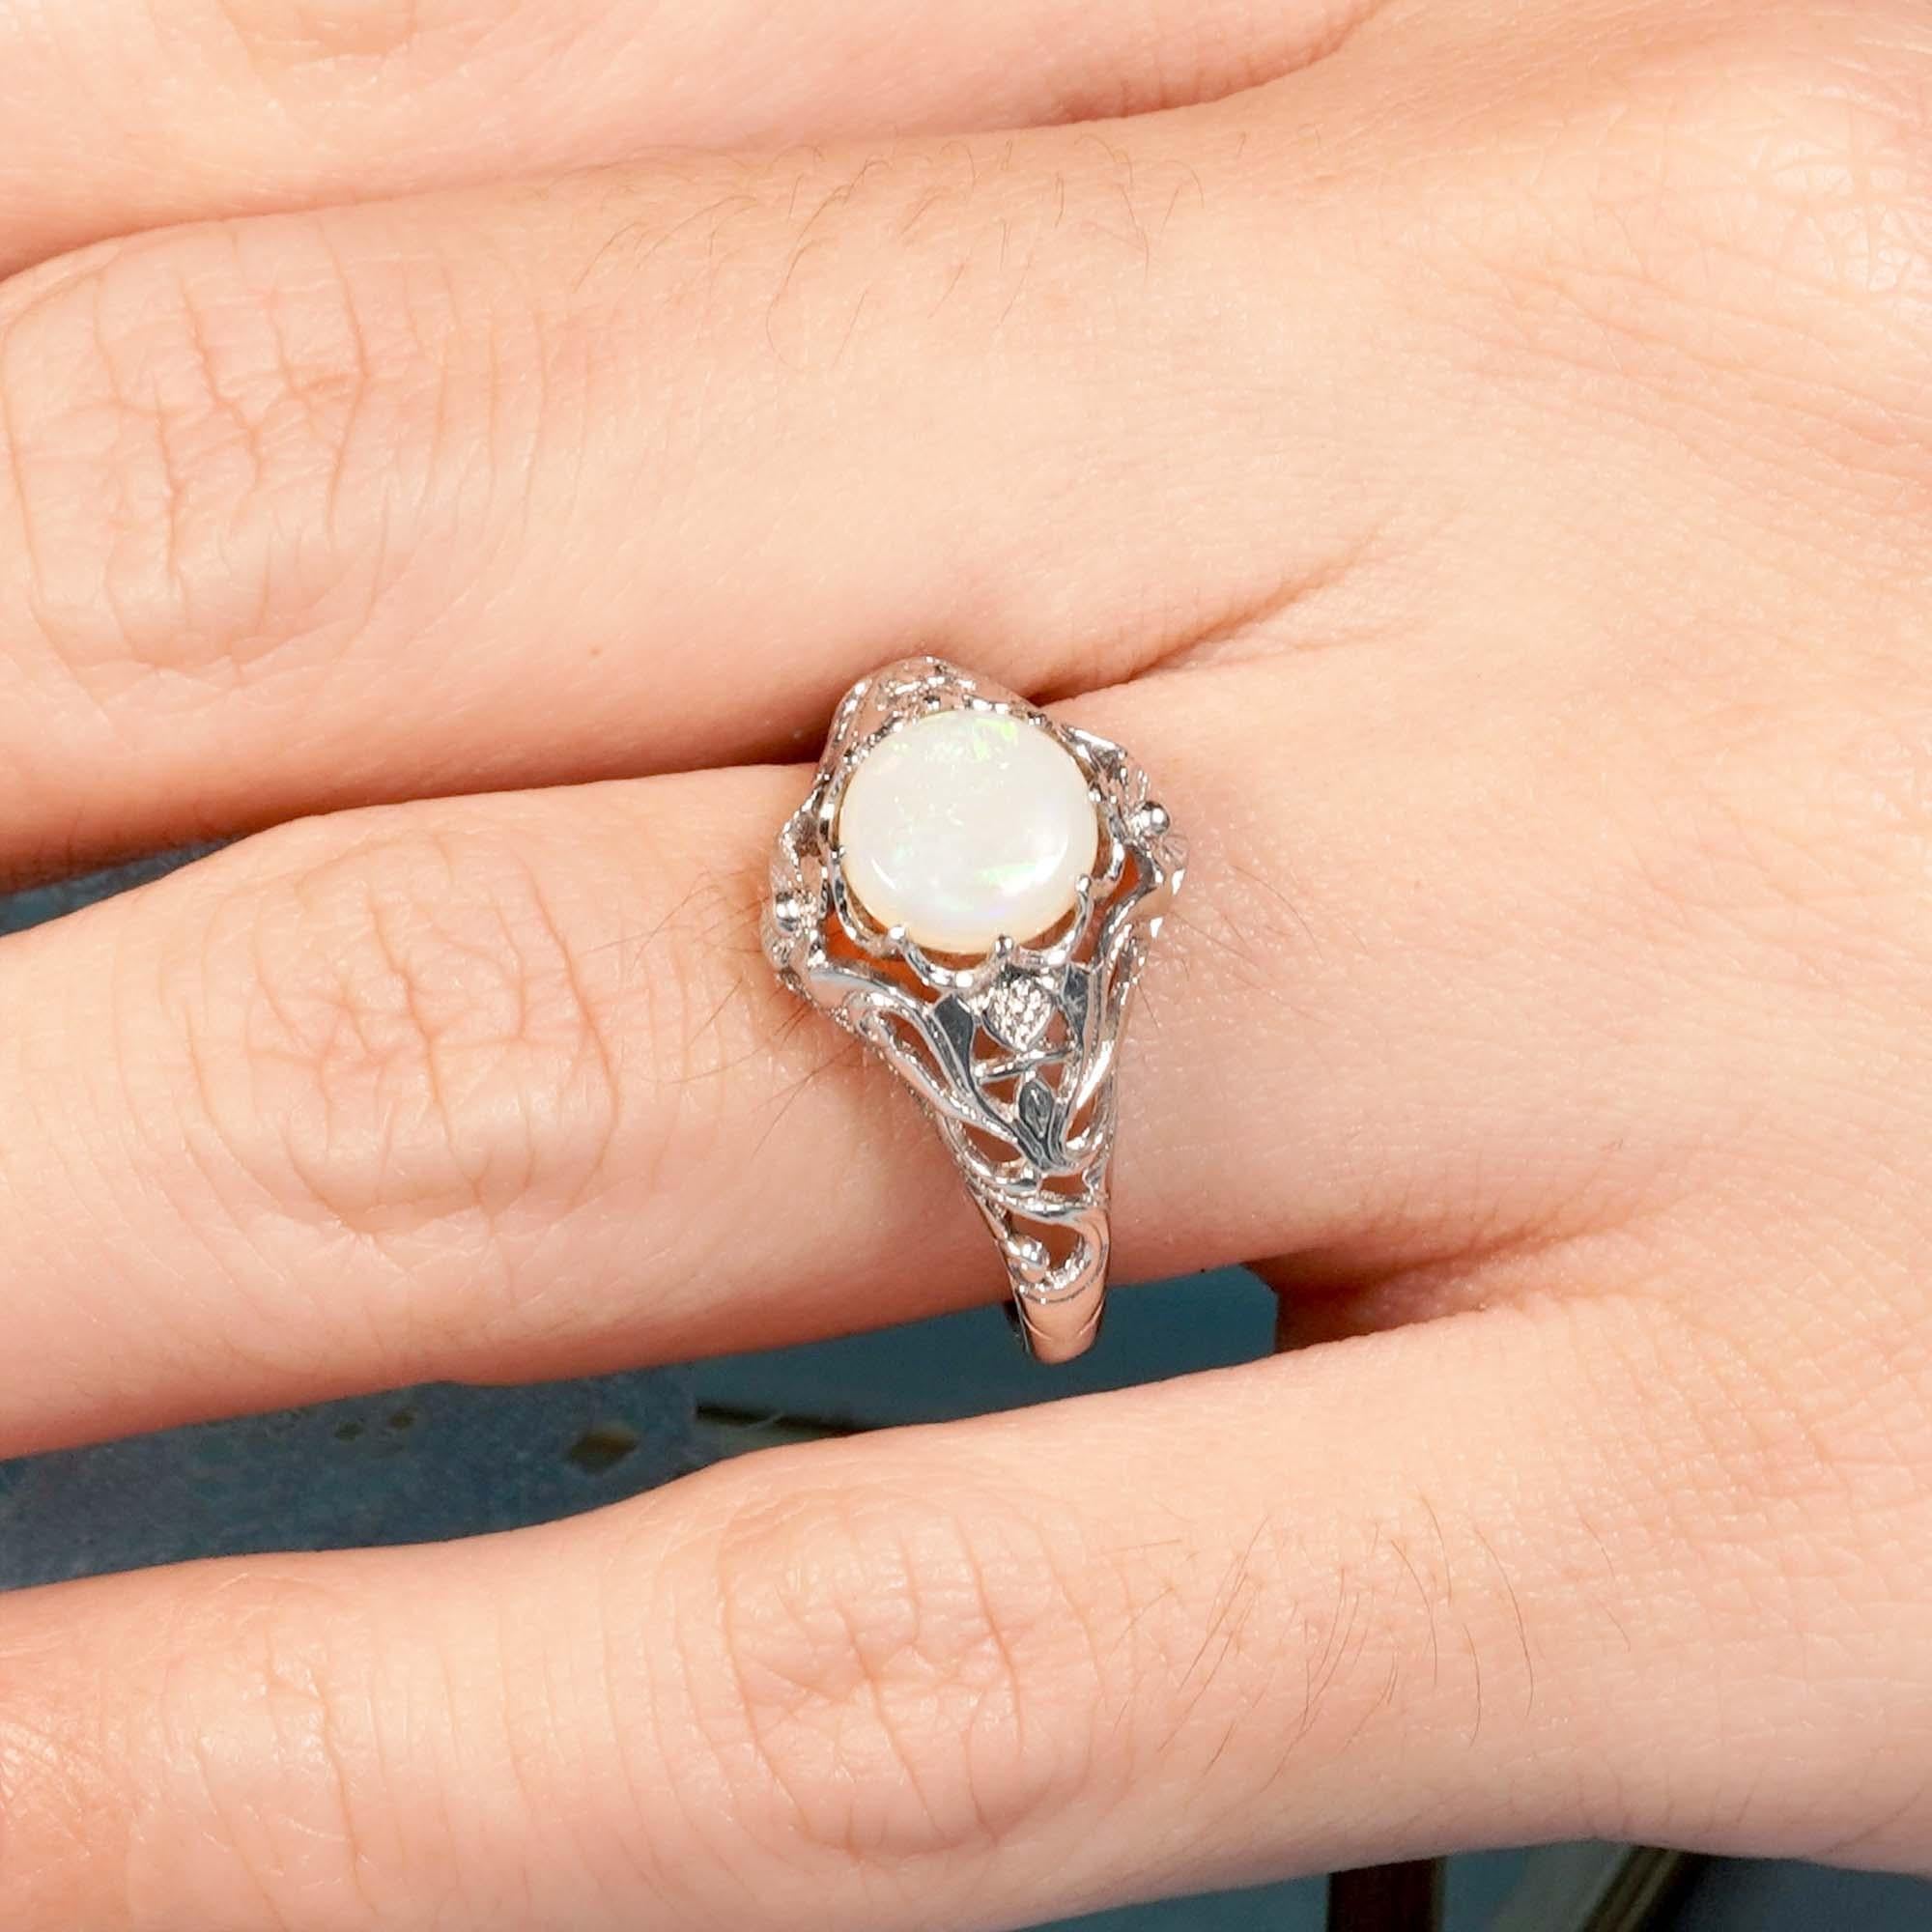 For Sale:  Natural Opal Vintage Style Filigree Solitaire Ring in Solid 9K White Gold 8